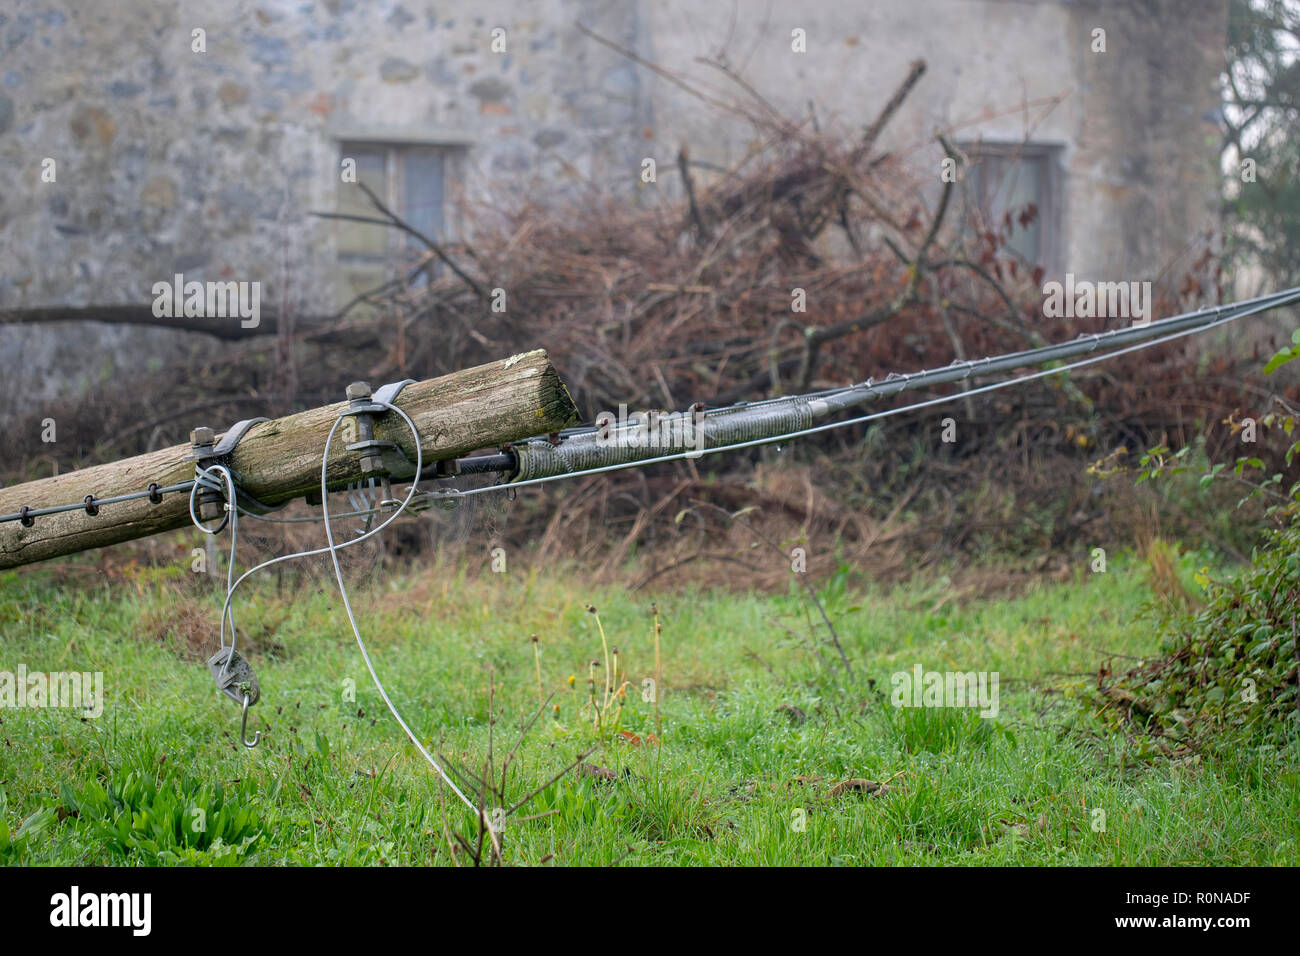 Phone lines down following storms and strong winds resulting in fallen wooden telegraph pole. Rural Italy. Stock Photo